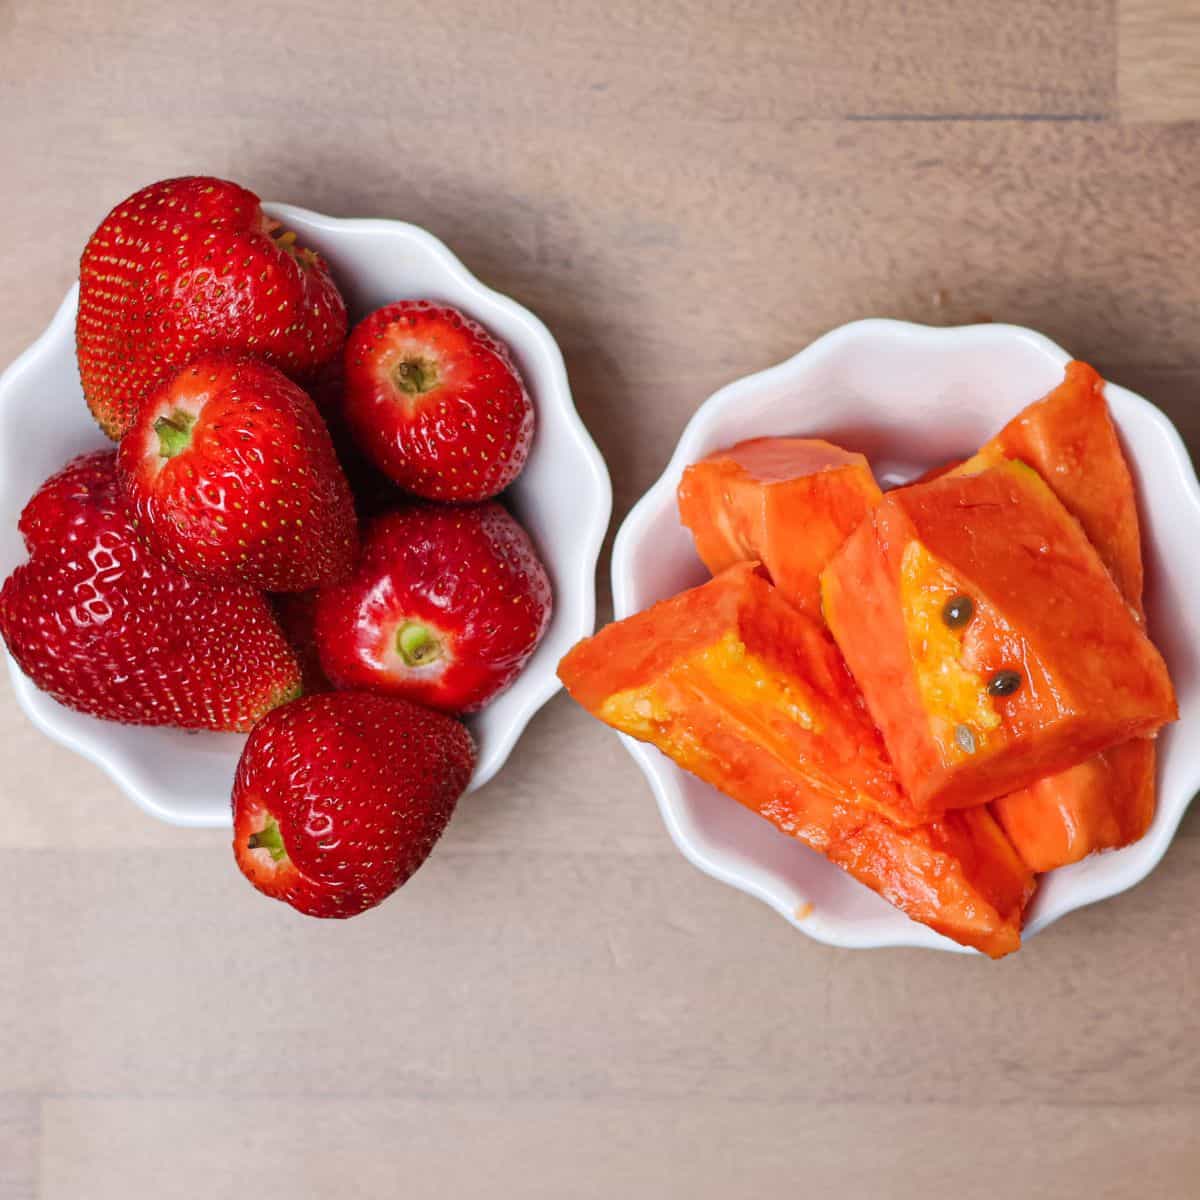 Fresh whole strawberries and freshly cut papaya chunks in separate bowls, prepped for the smoothie.